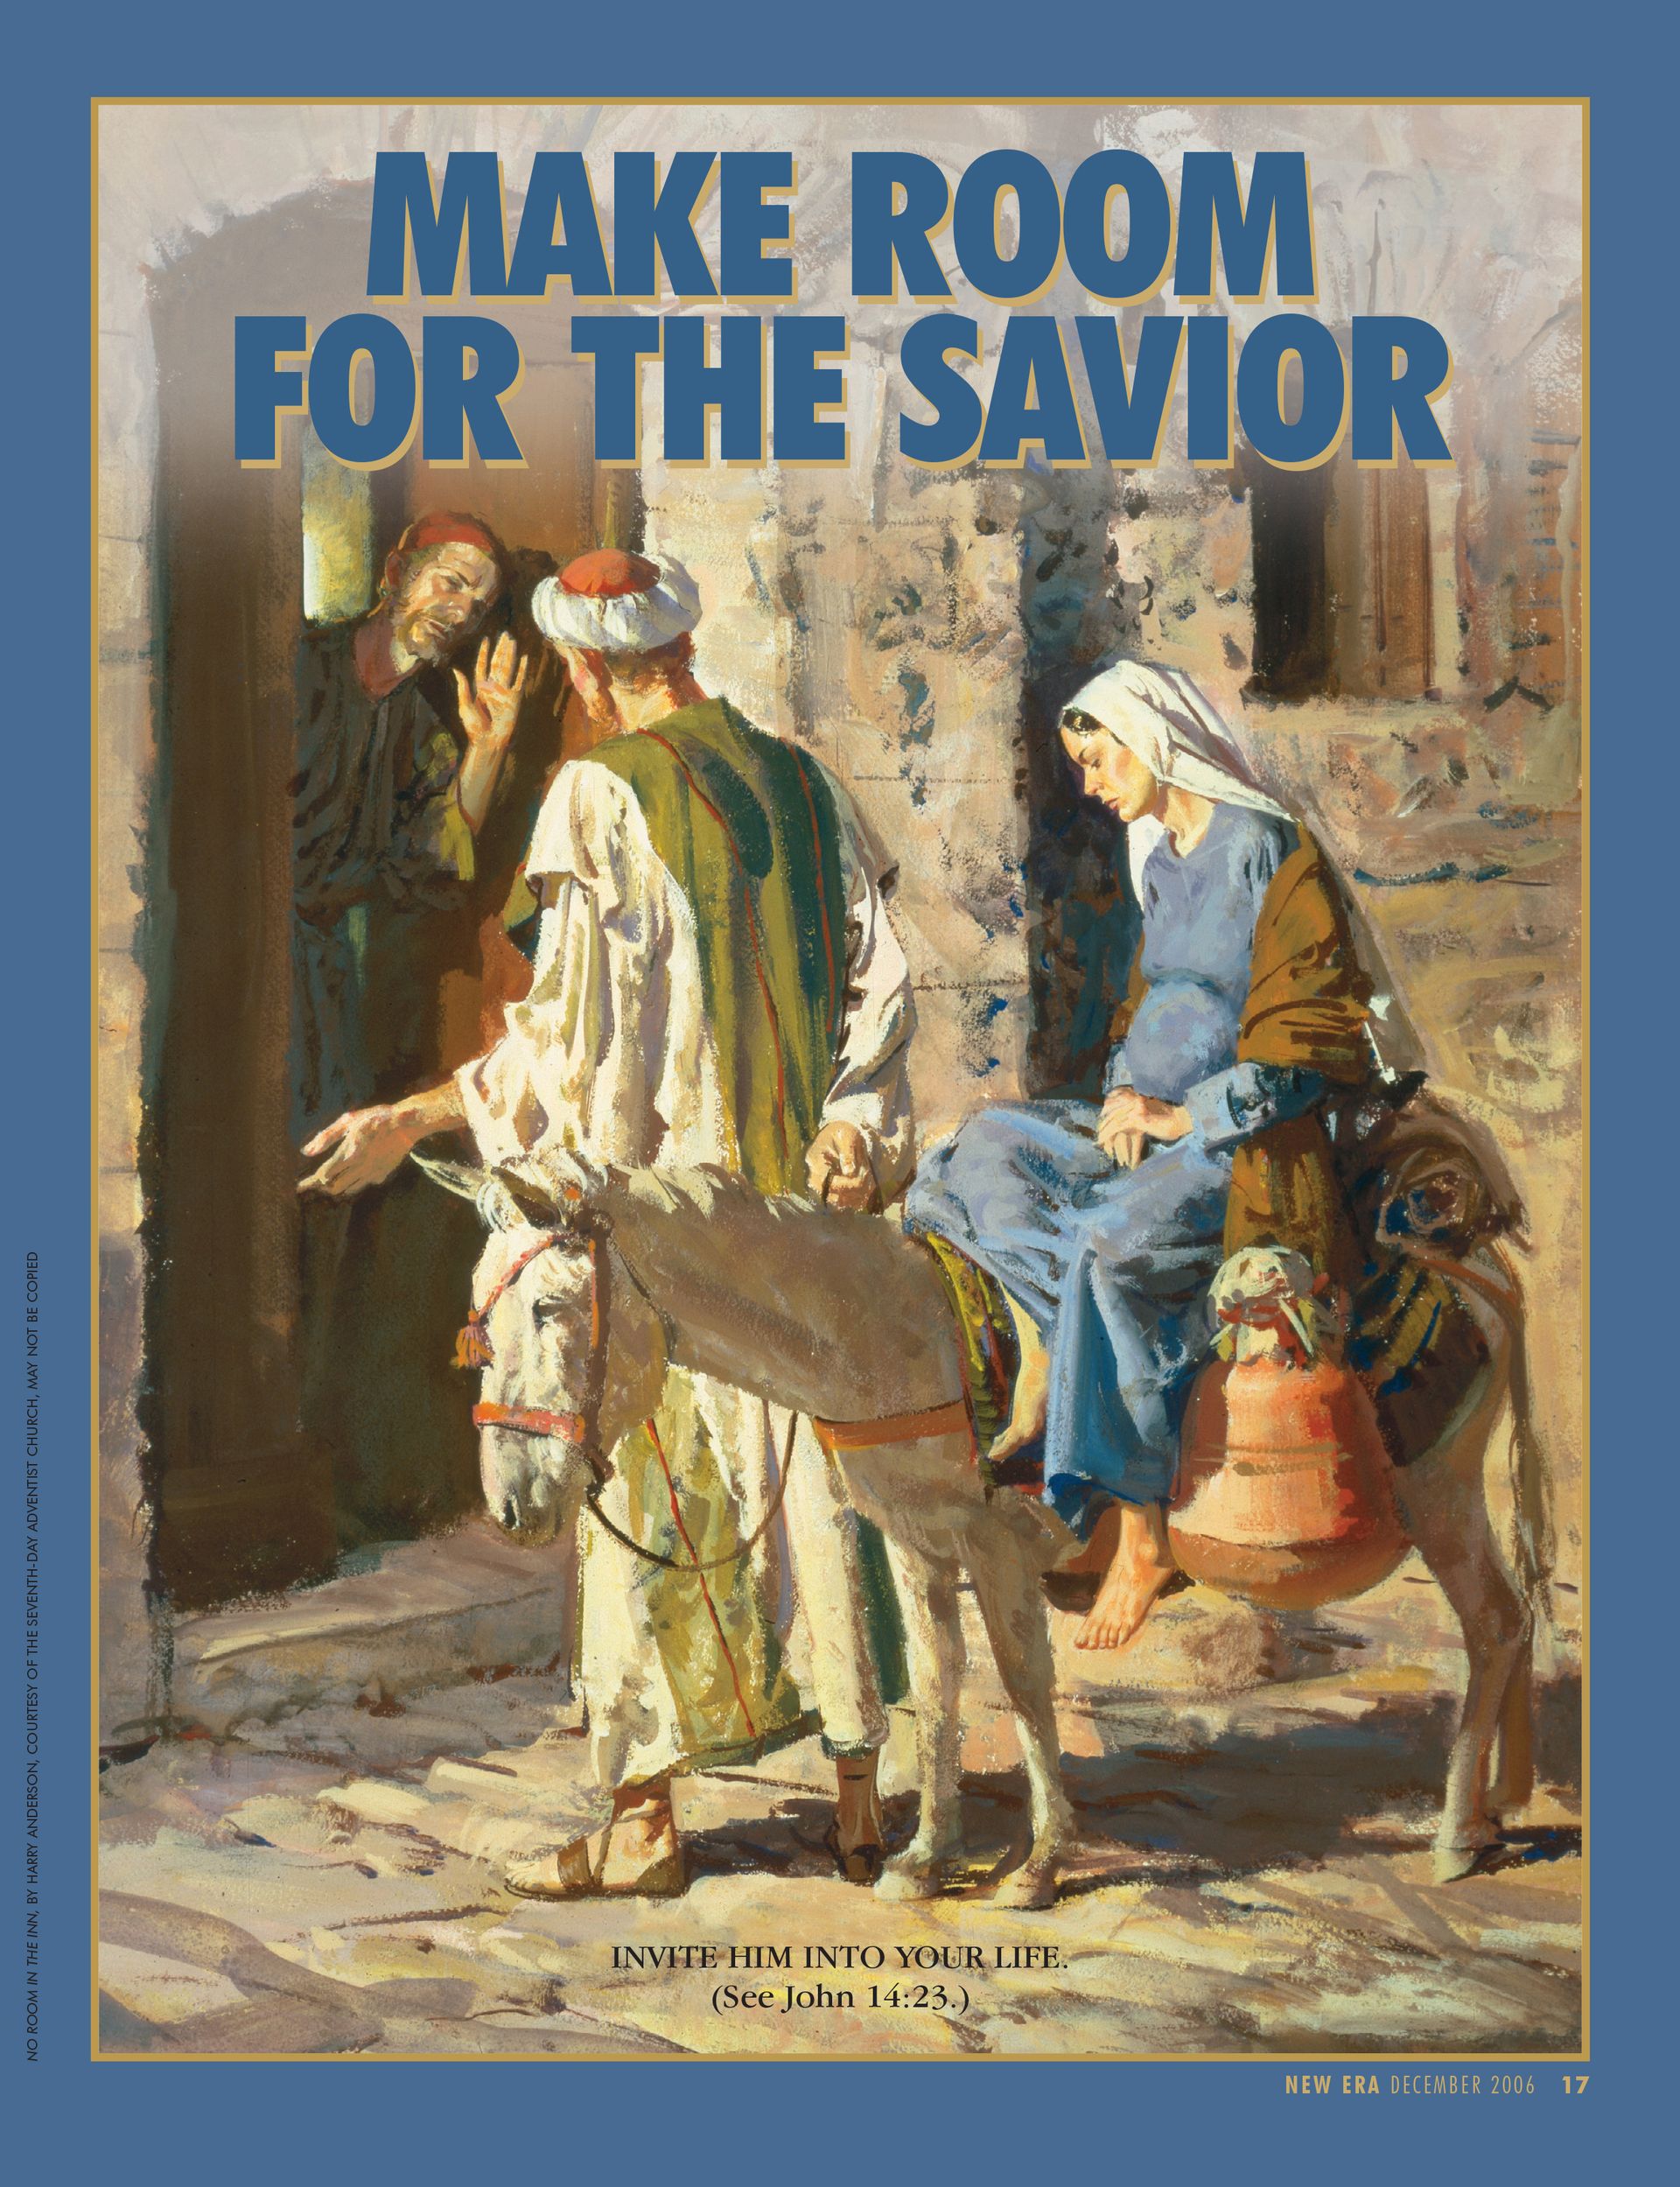 Make Room for the Savior. Invite Him into your life. (See John 14:23.) Dec. 2006 © undefined ipCode 1.